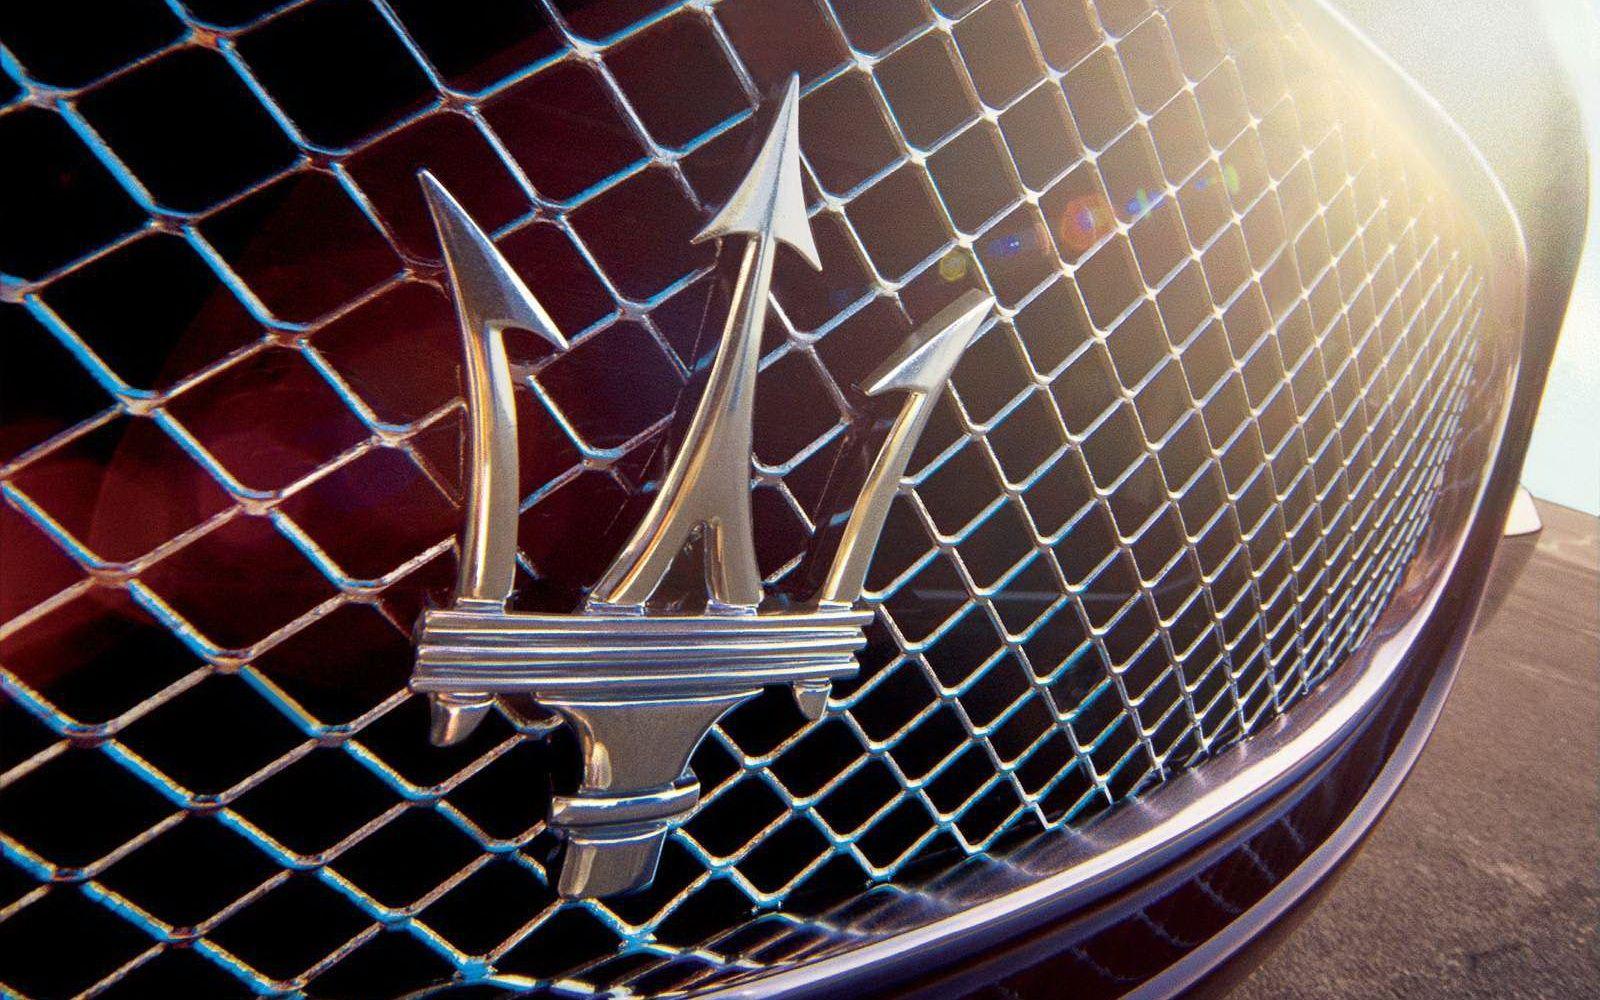 Red Maserati Logo - Maserati Logo, Maserati Car Symbol Meaning and History. Car Brand